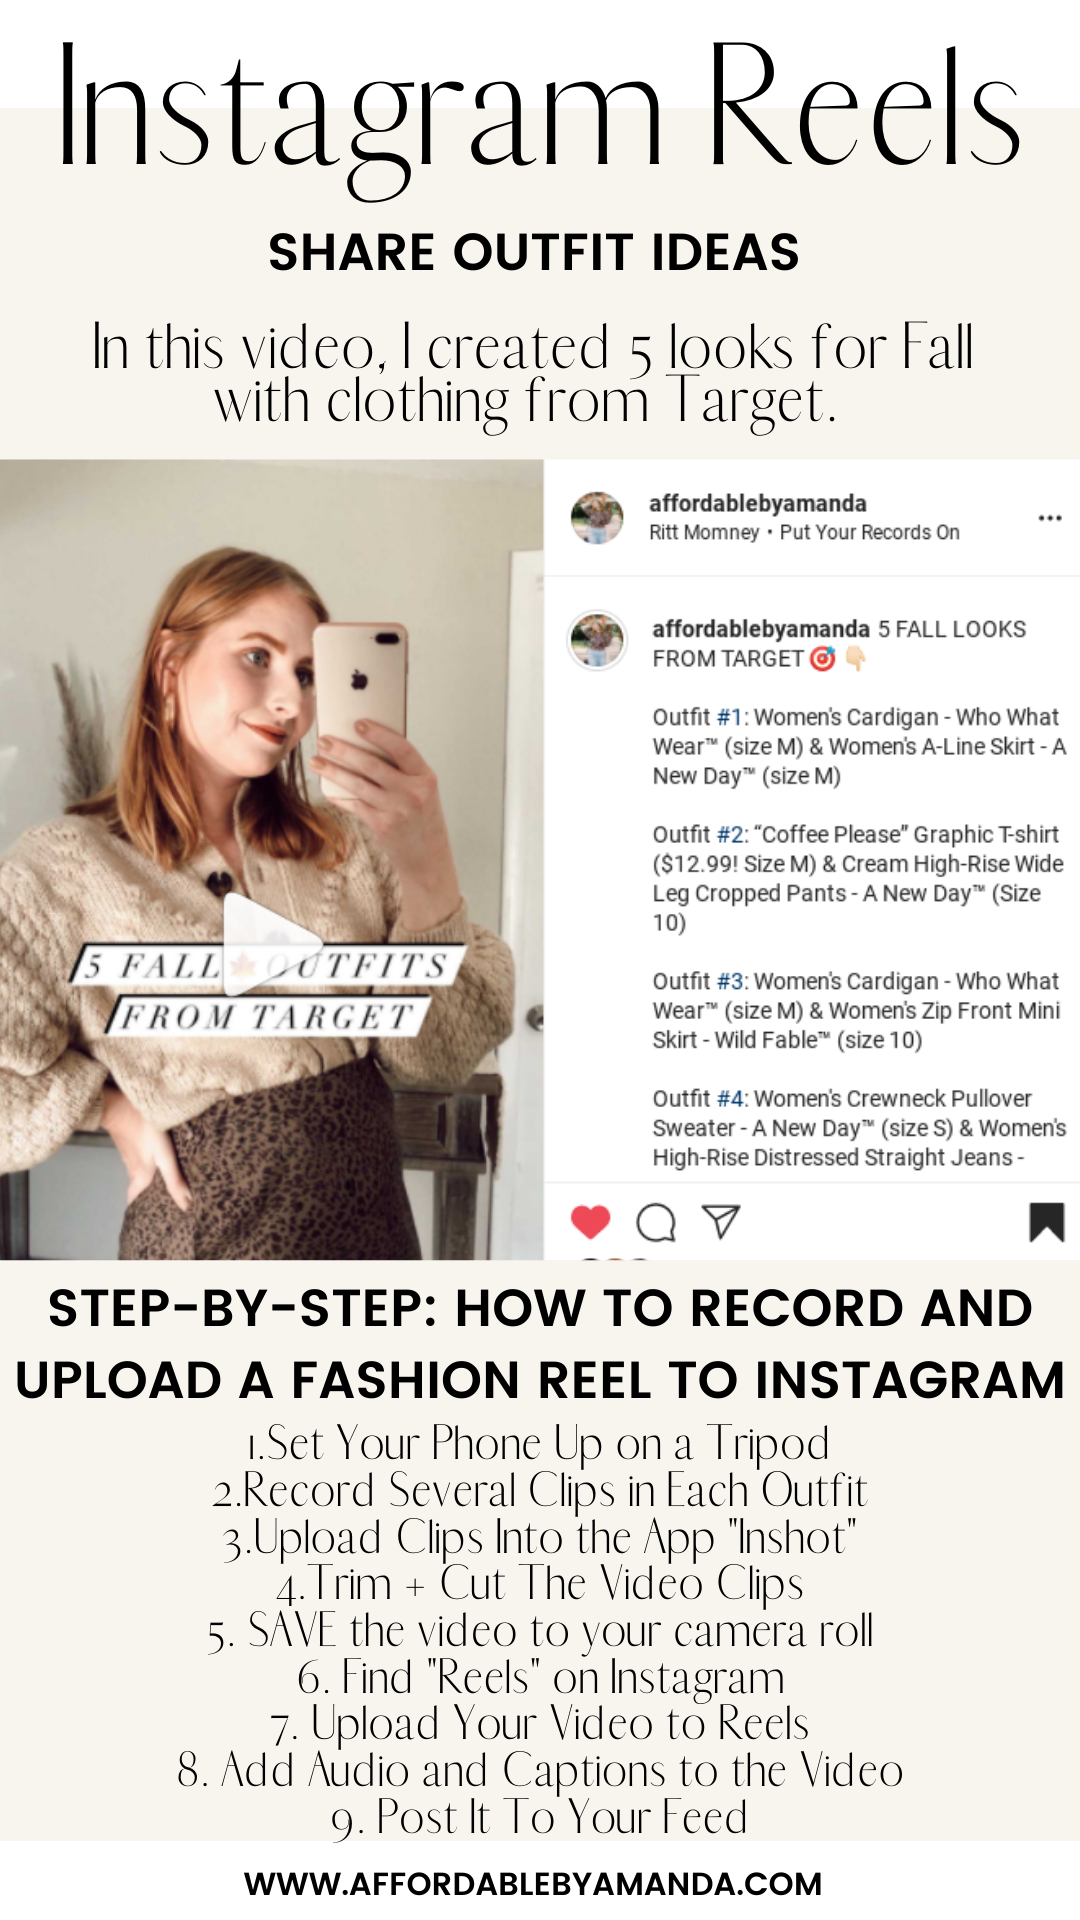 20 Content Ideas for Instagram Reels in 2021 - Affordable by Amanda